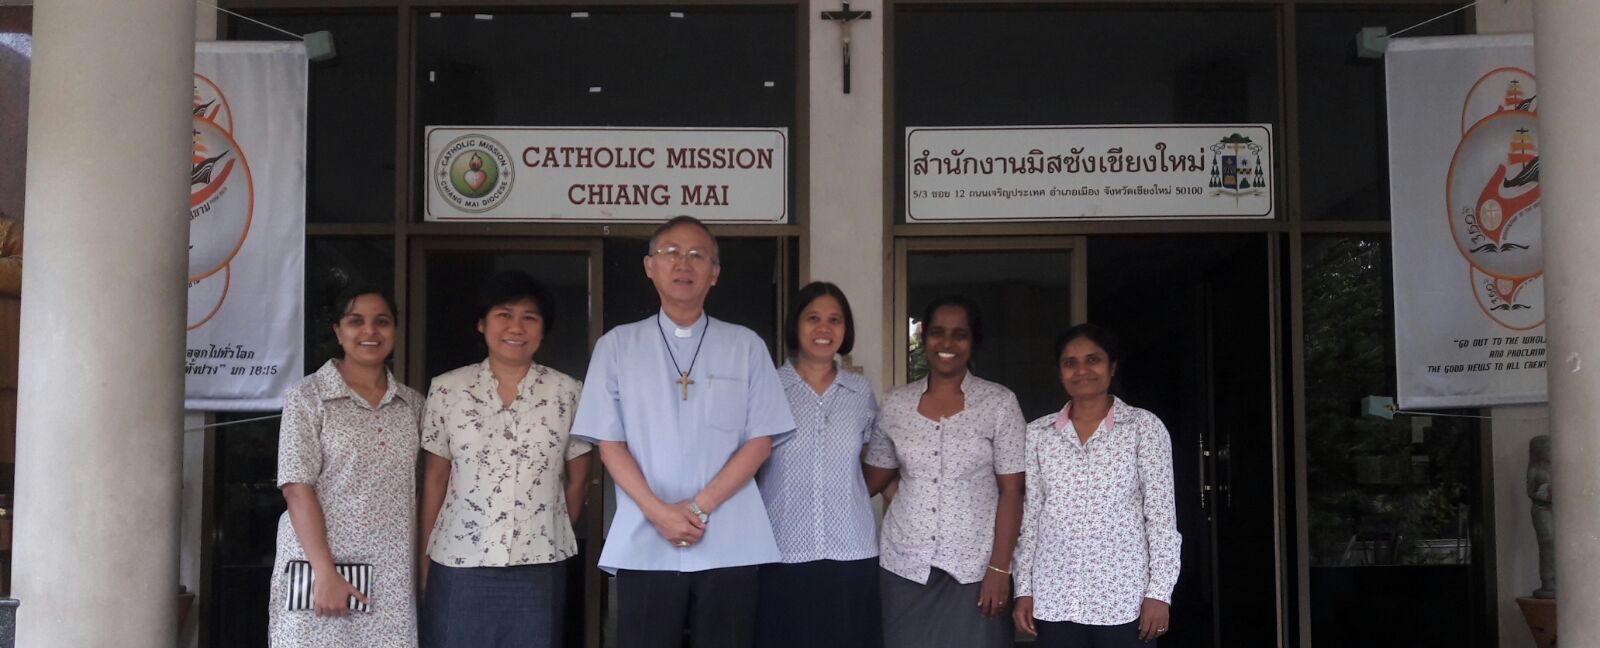 Sisters with Bishop Vira of Chiang Mai Diocese